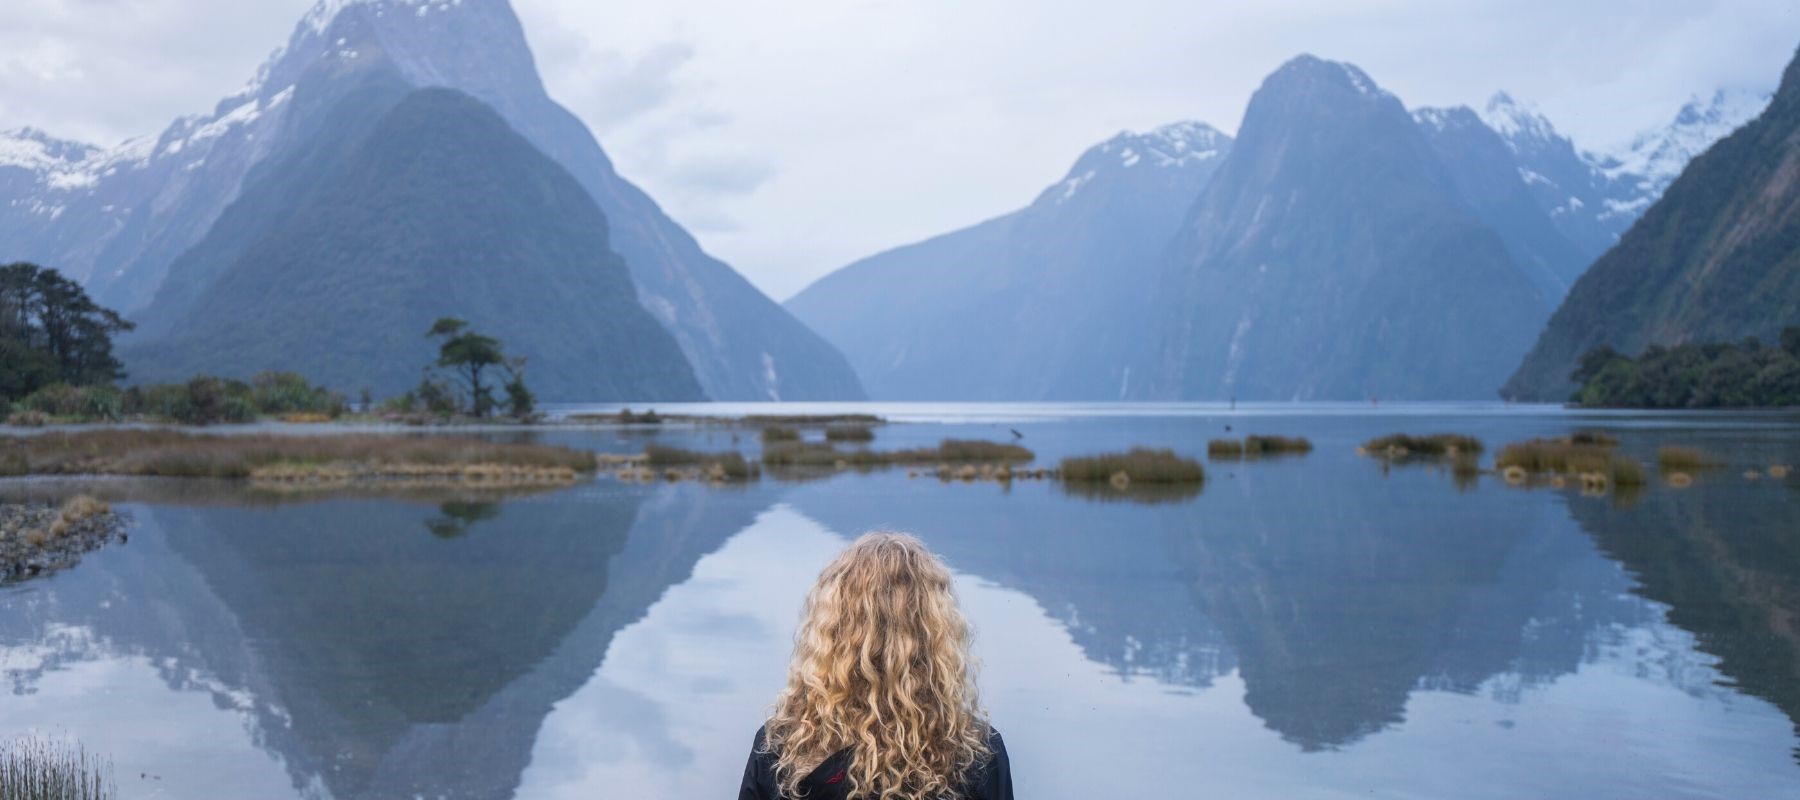 A curly-haired female looks across the Milford Sound peaks and calm water.